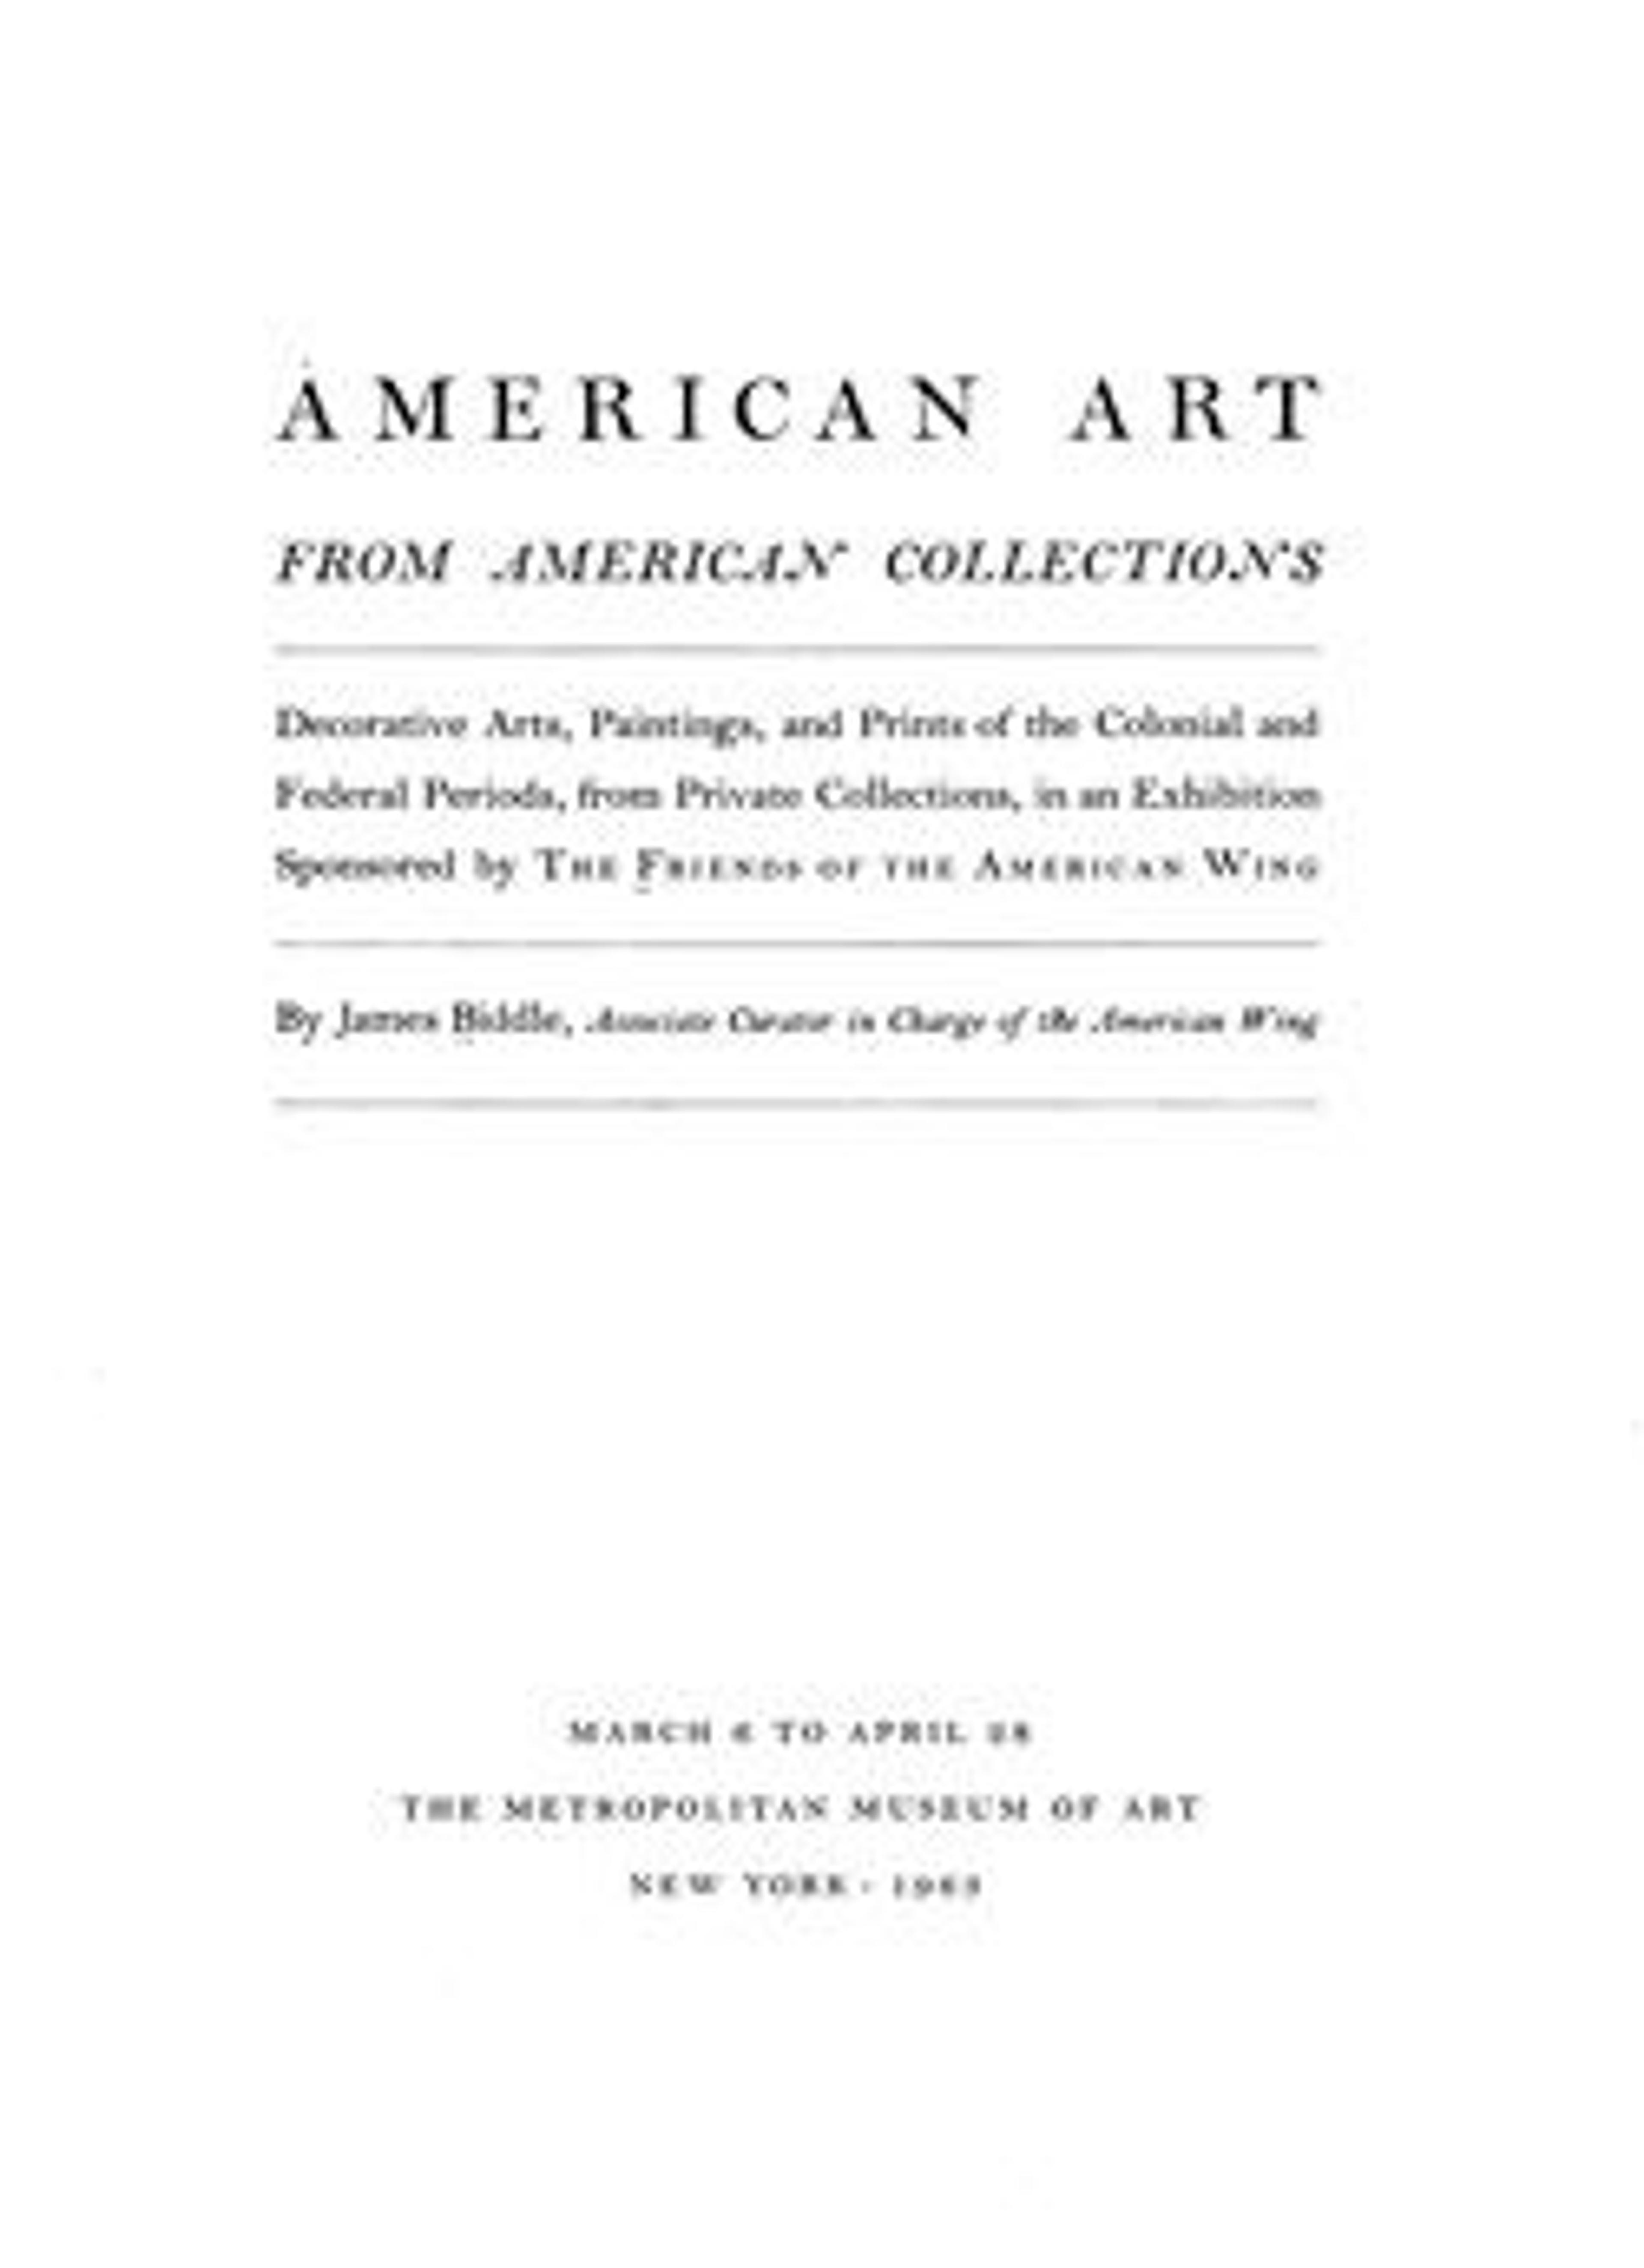 American Art from American Collections